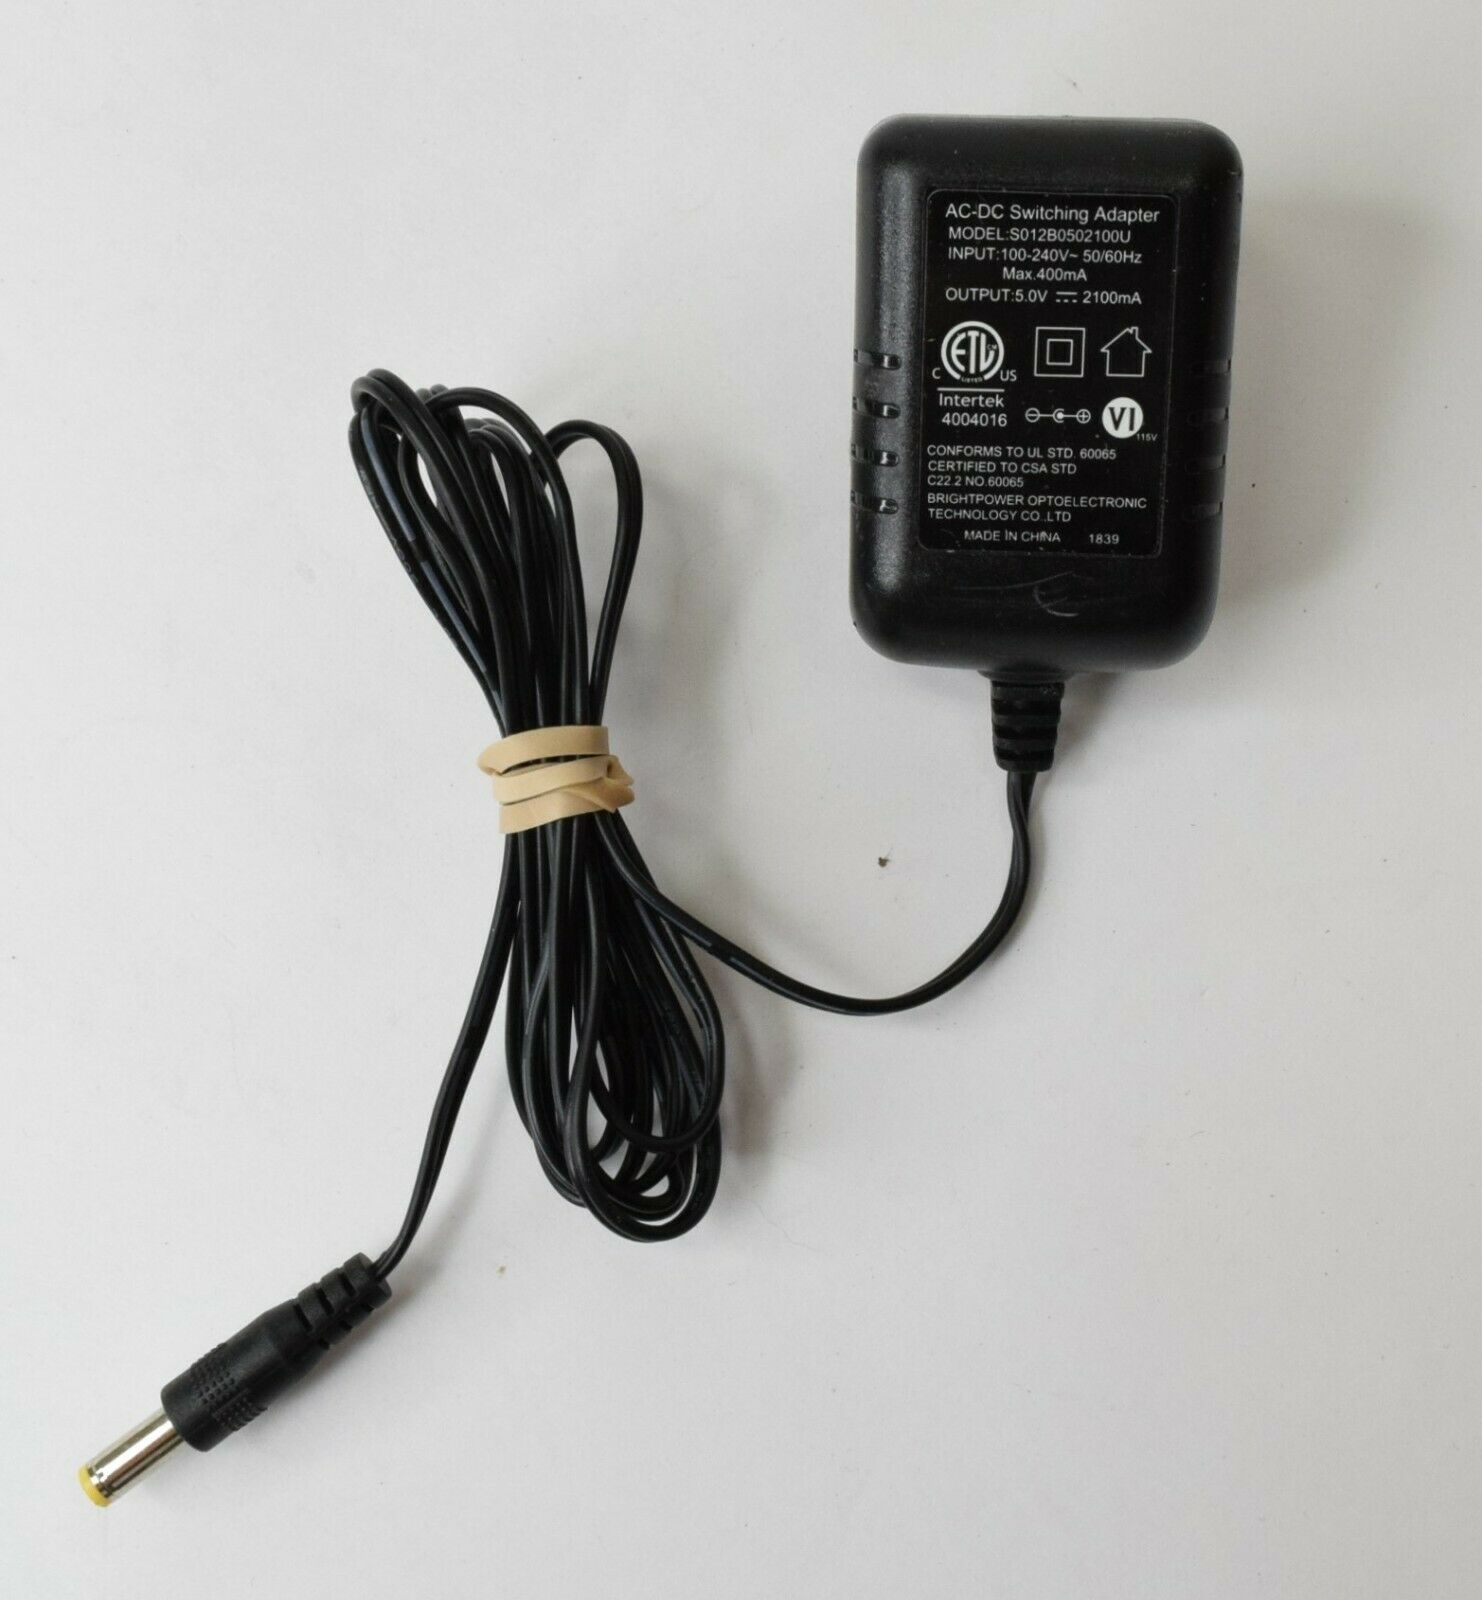 BrightPower AC/DC Switching Power Supply Adapter Unit S012B0502100U 5V 2100mA Type: Adapter Output Voltage: 5 V Feat